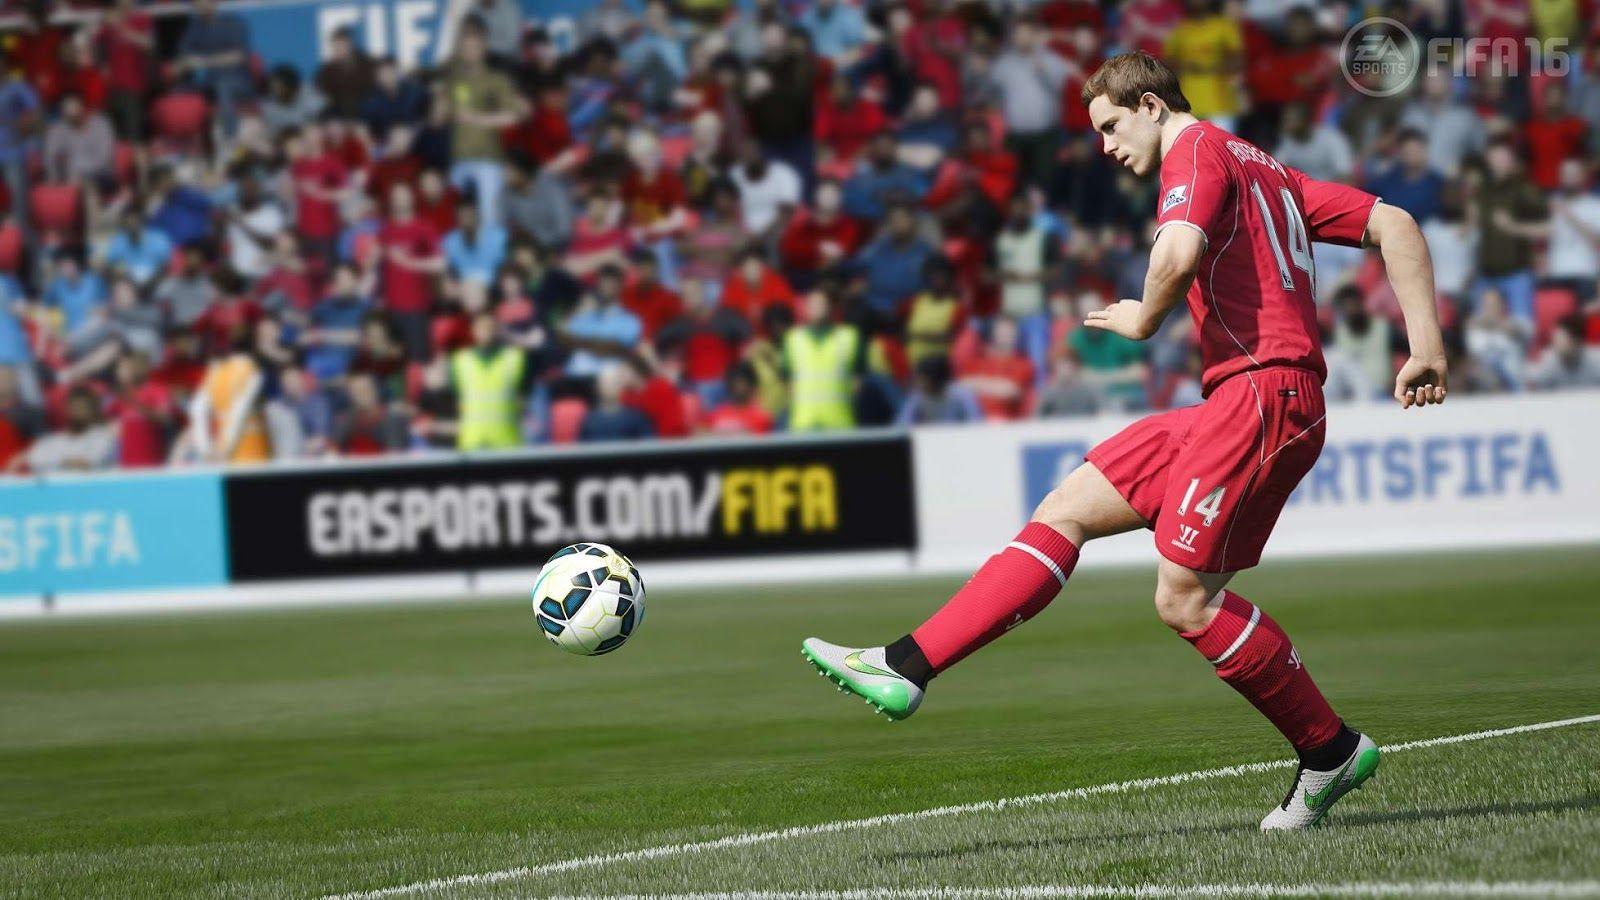 EA FIFA 2016 Soccer PC Game For Free Download. Download Software